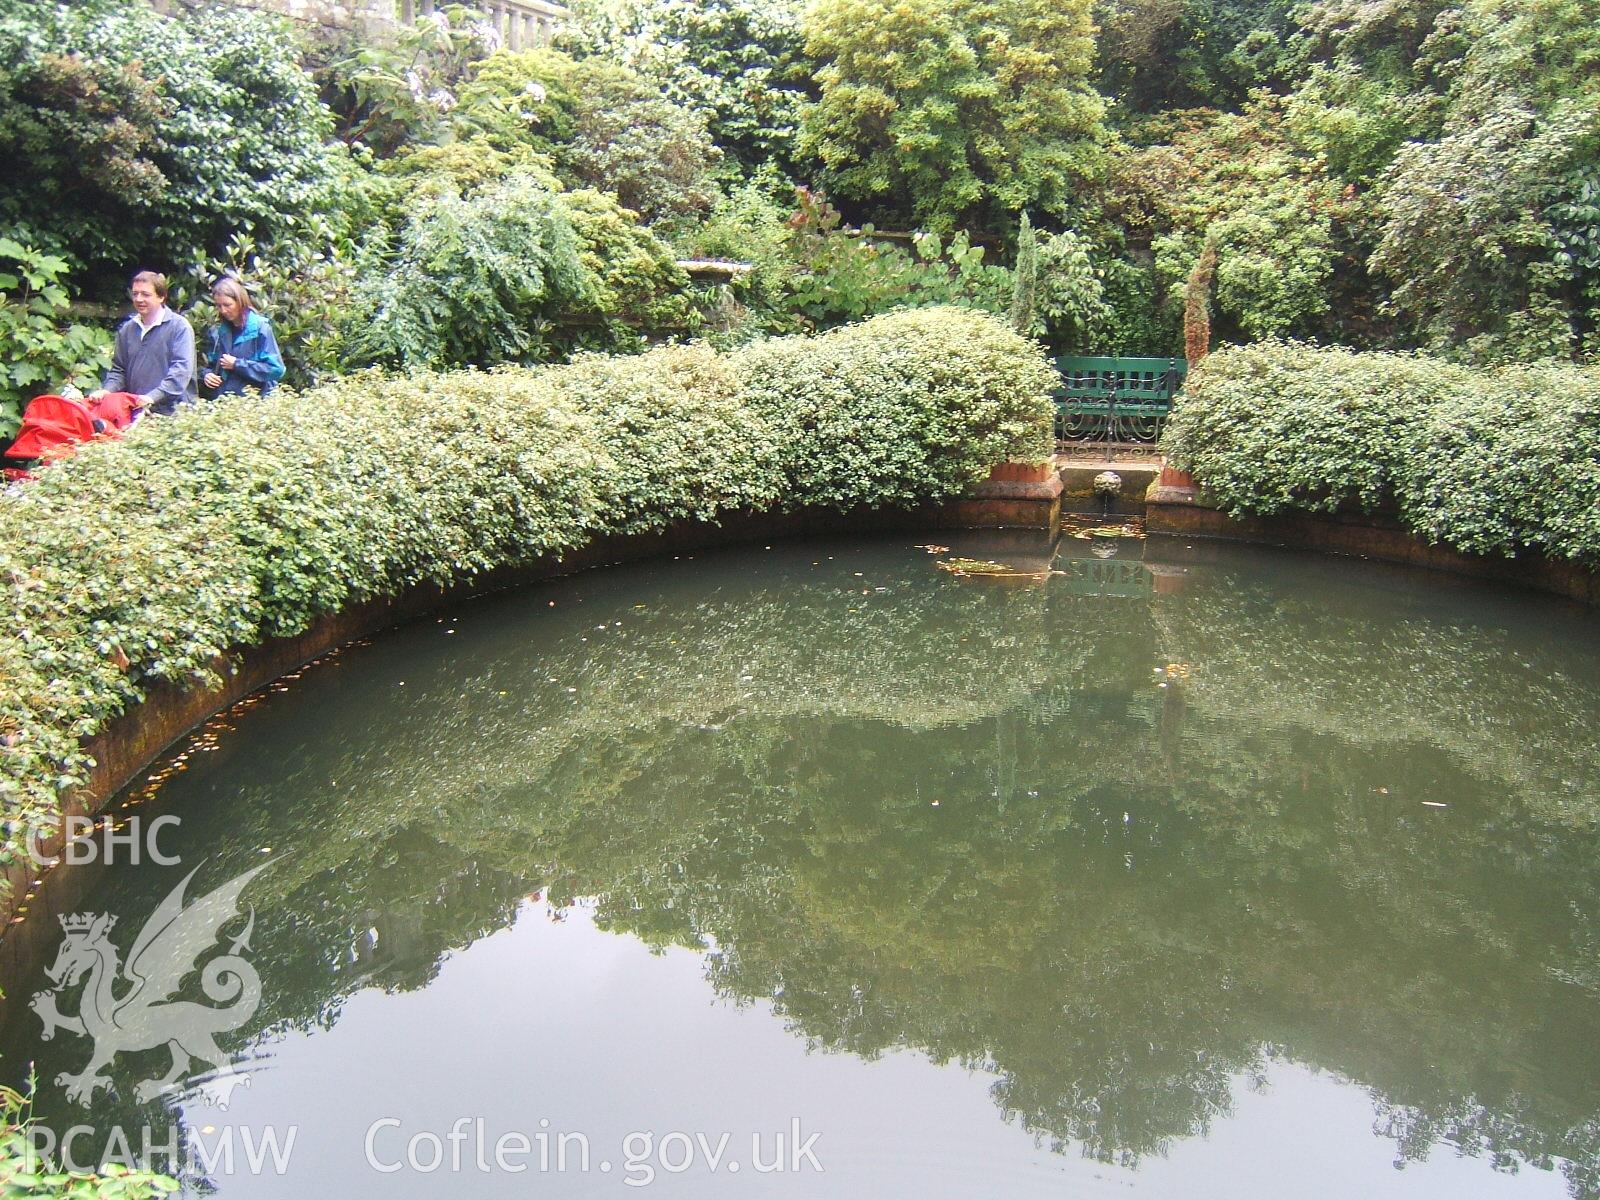 Deep round pond or swimming pool at head of stream in the Front Lawn, looking N.E.